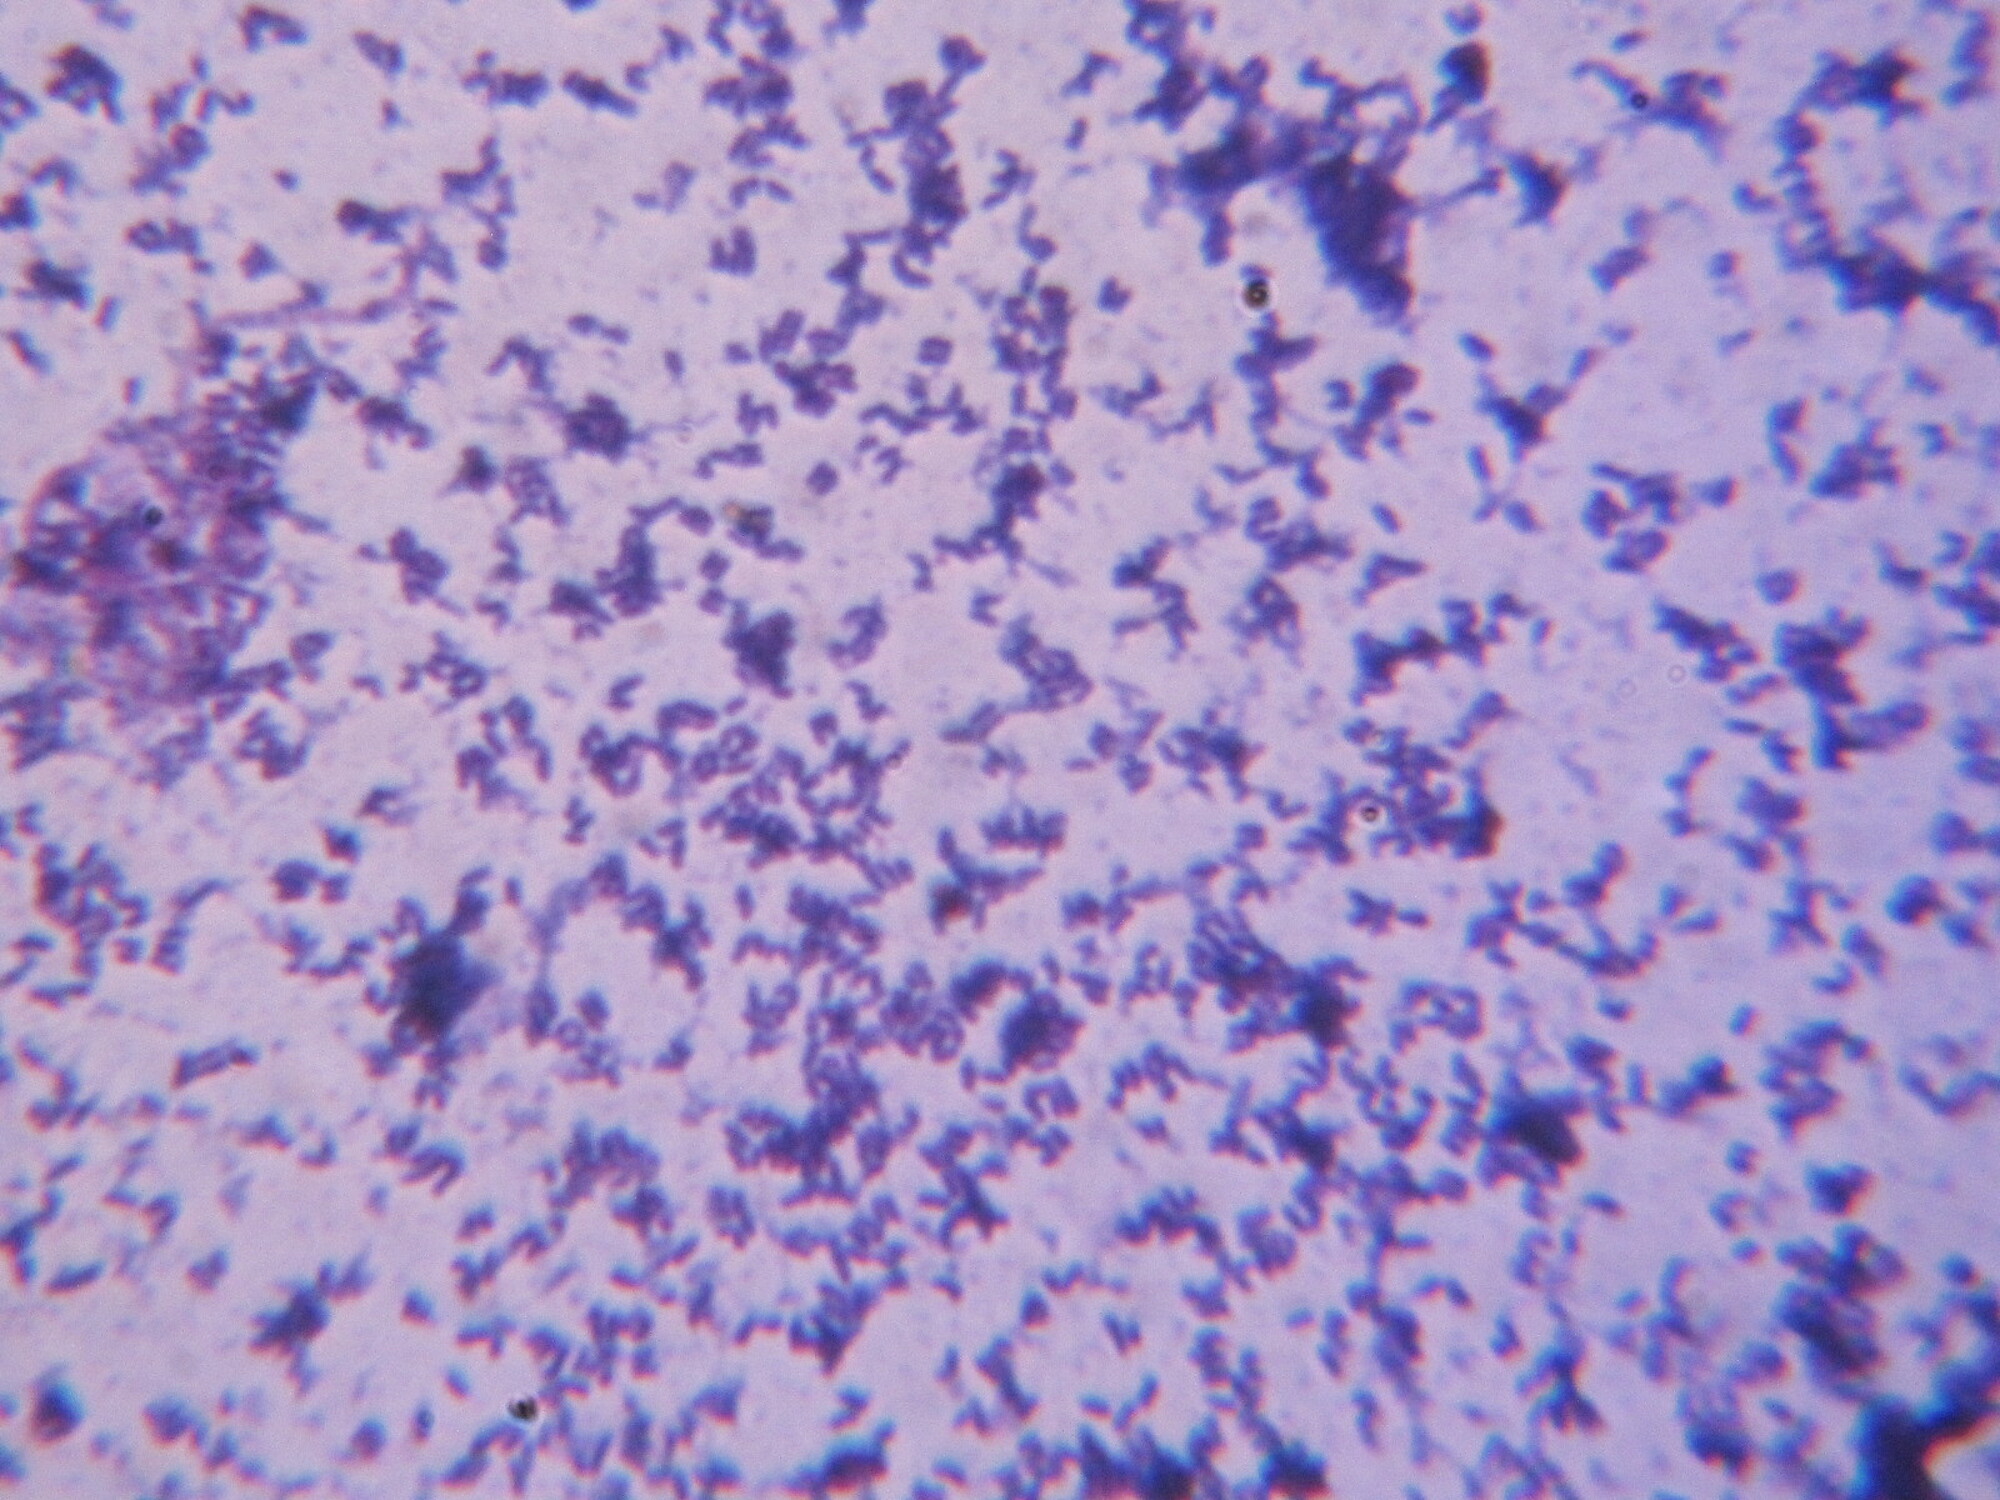 Cureus | Bacterial Colony: First Report of Donut Colony Morphology